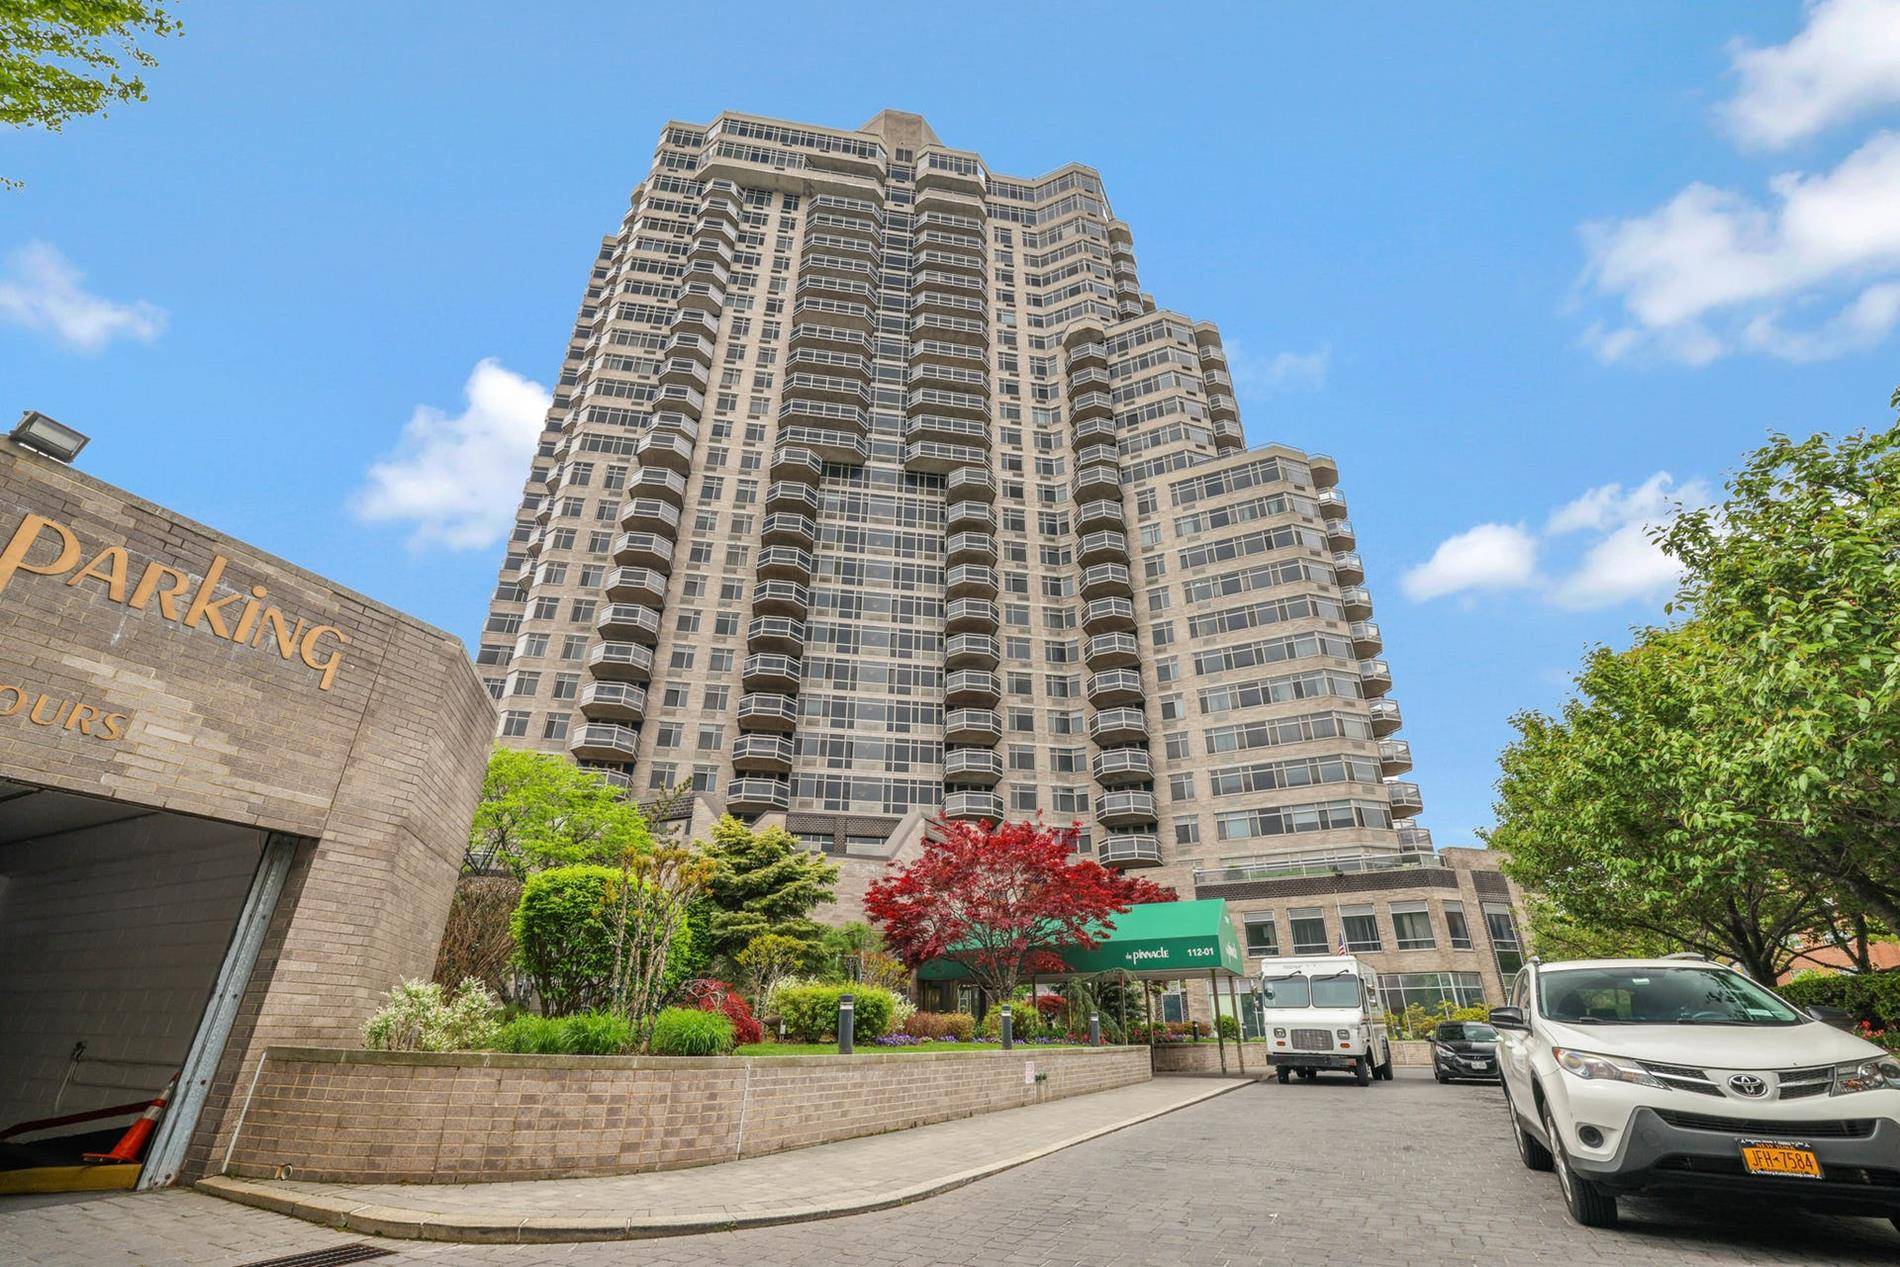 Rare opportunity ! Mint condition split two bedroom two bathroom residence in the most gorgeous high rise building in Forest Hills.